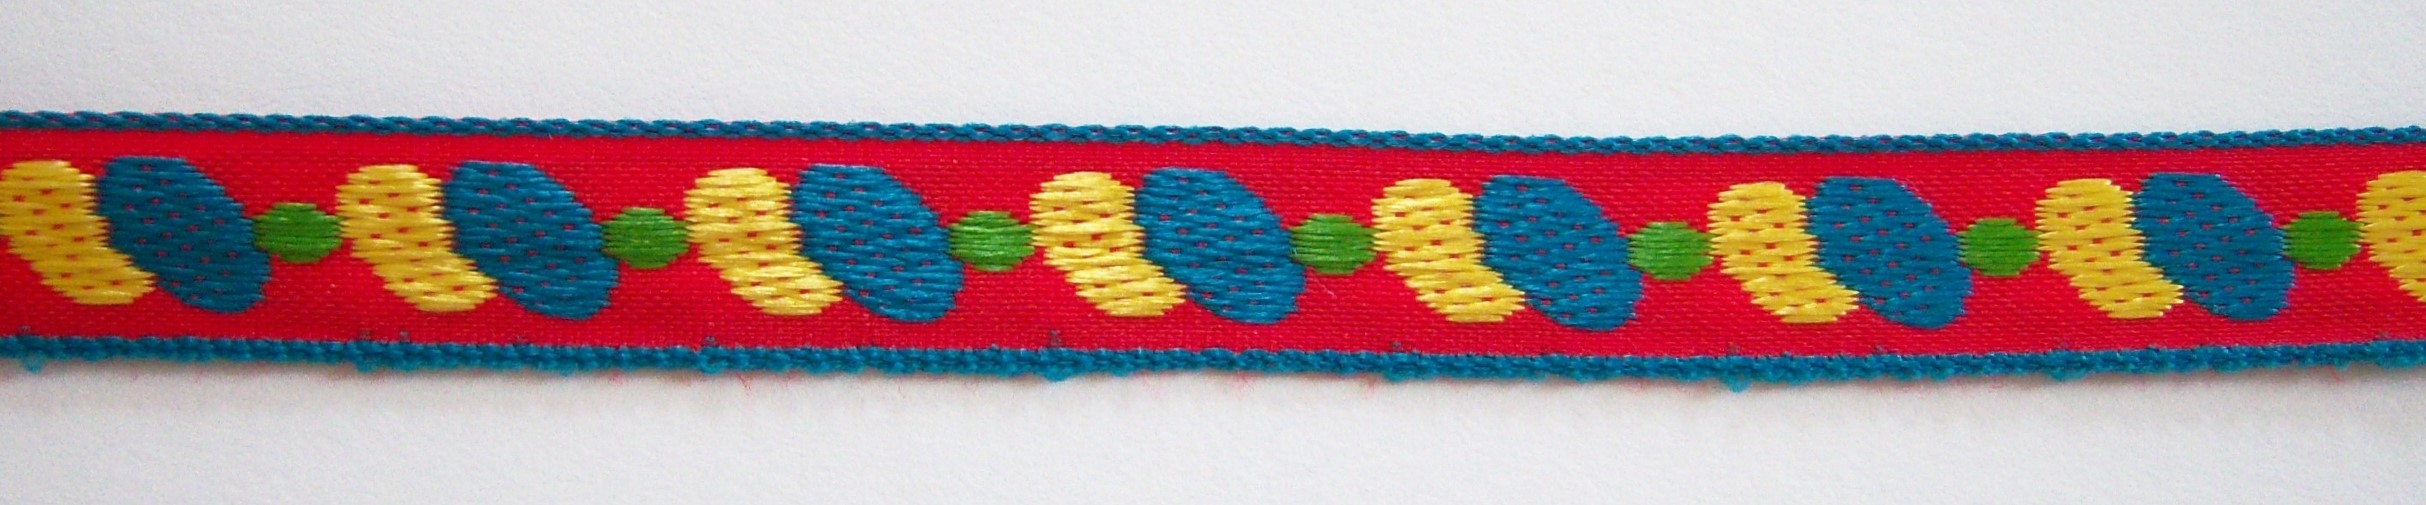 Red/Teal/Yellow 1/2" Jacquard